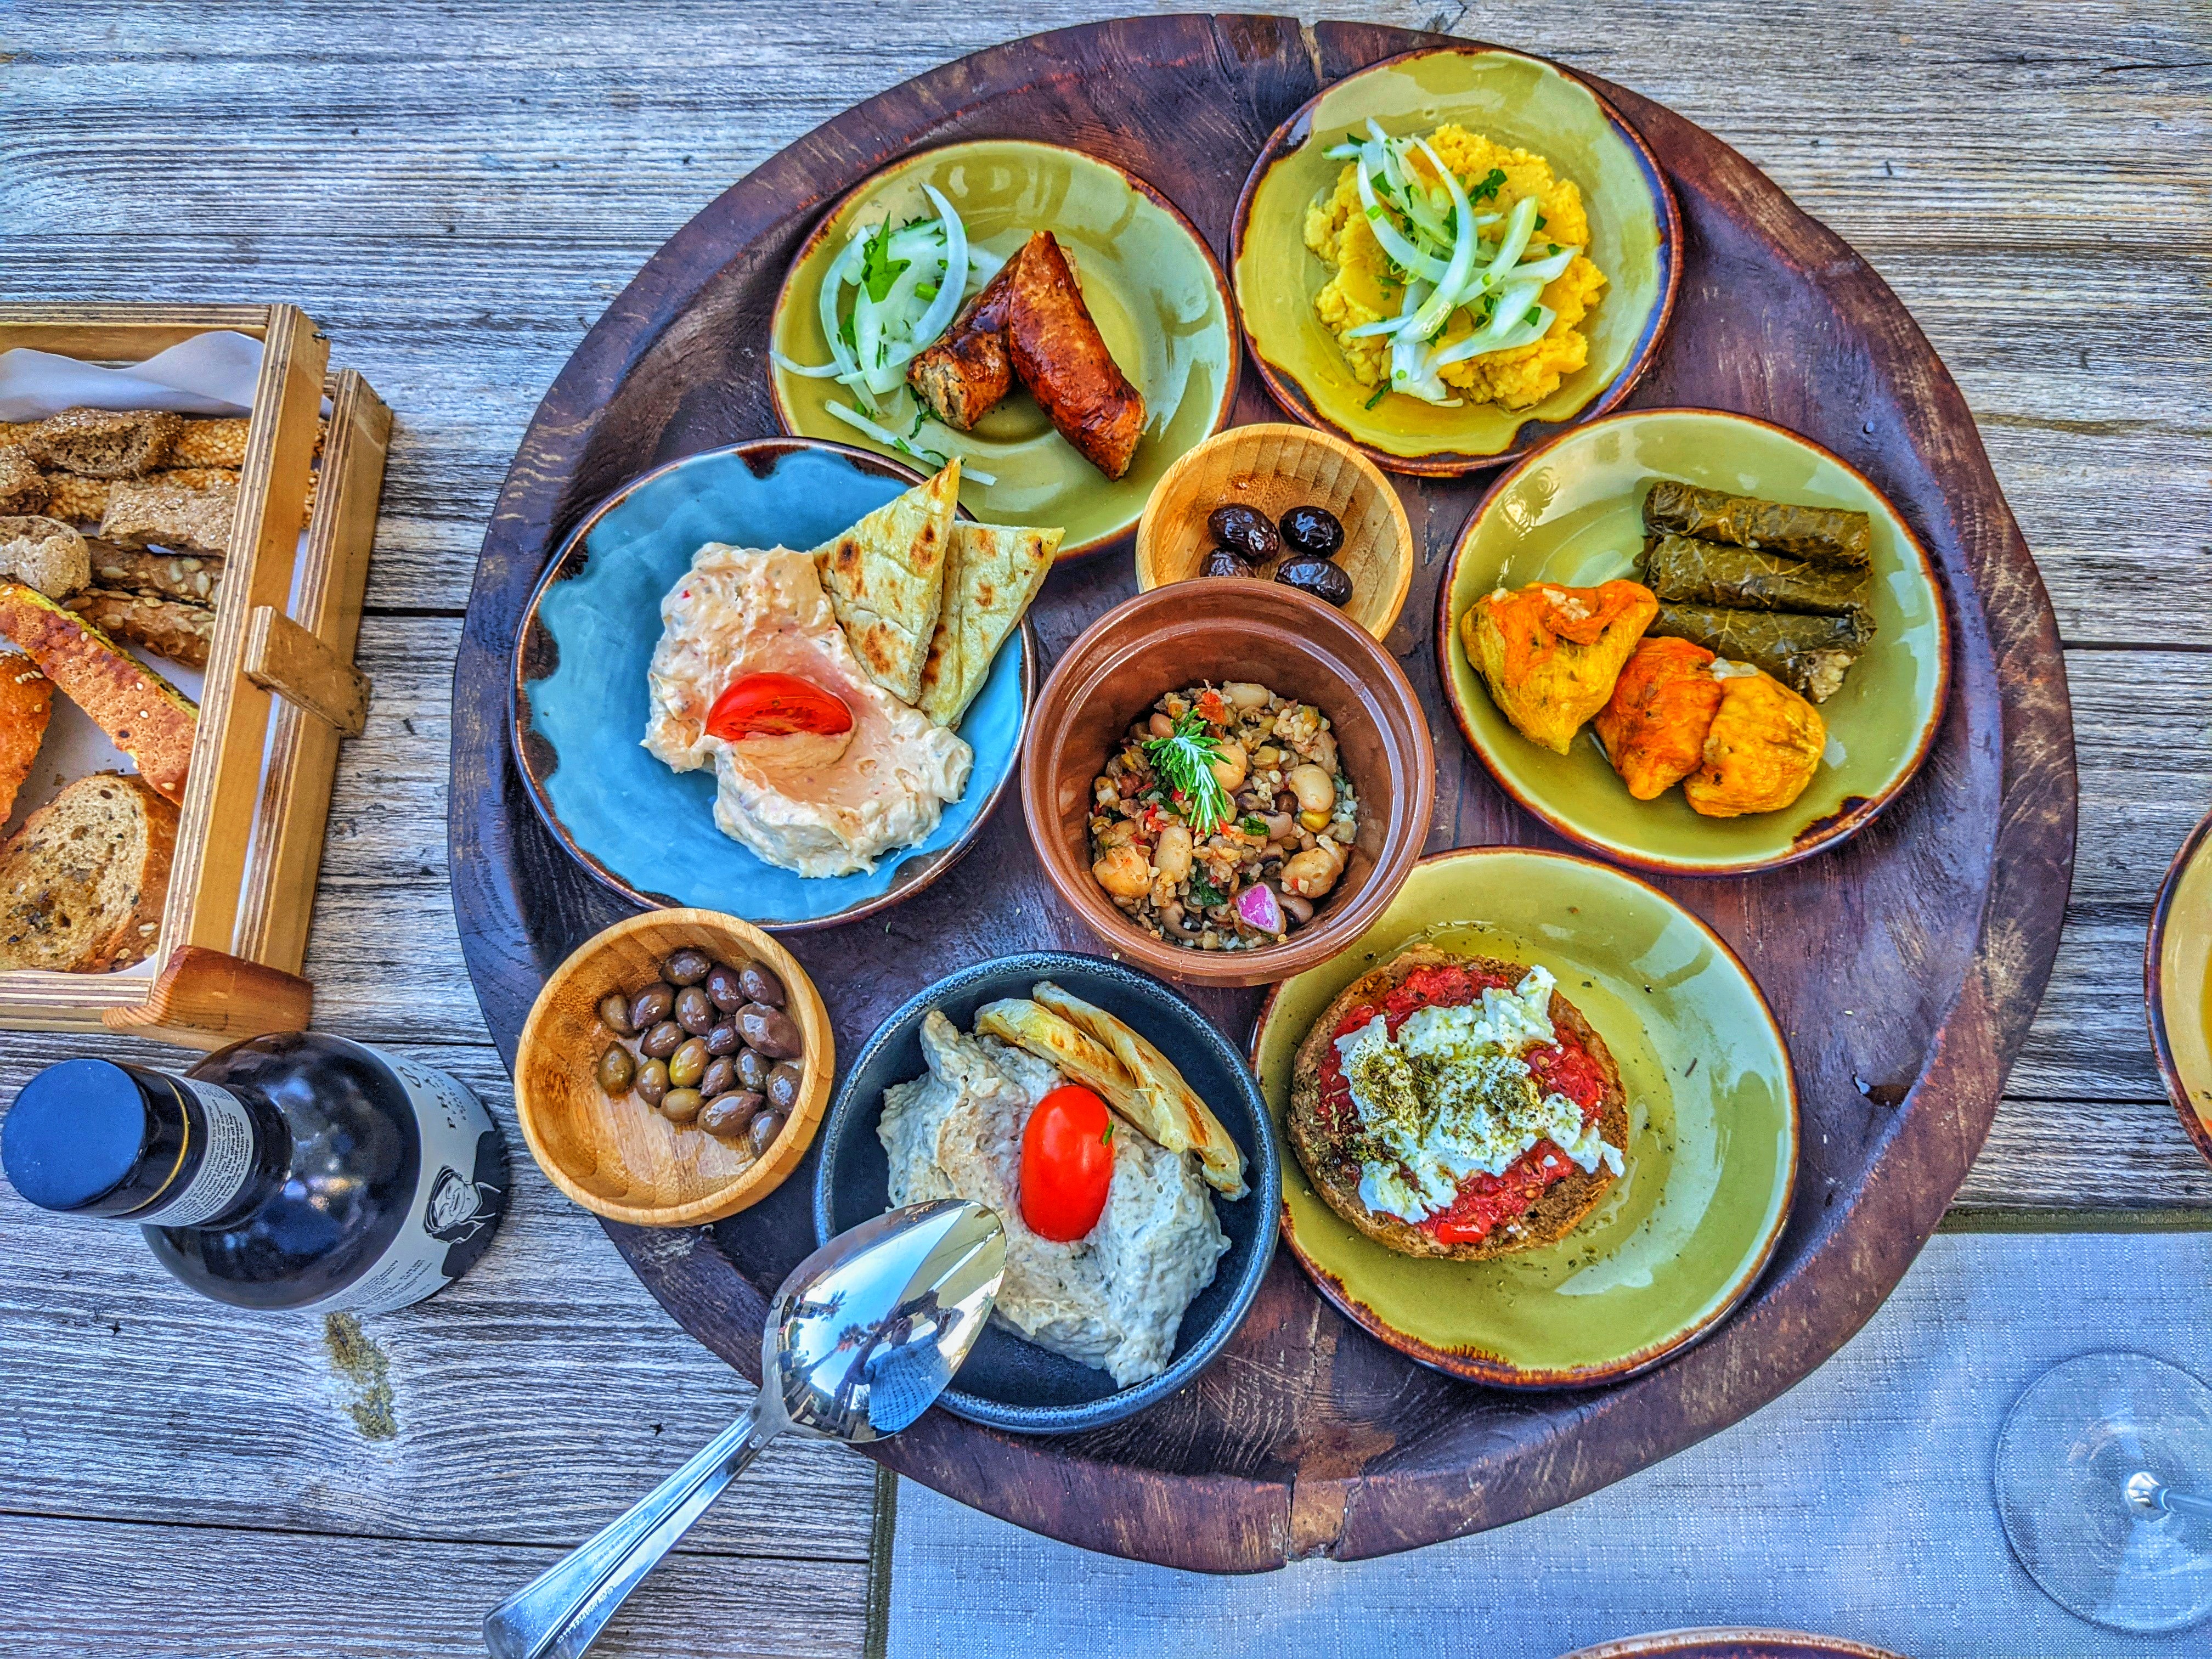 A traditional plate of meze in Crete